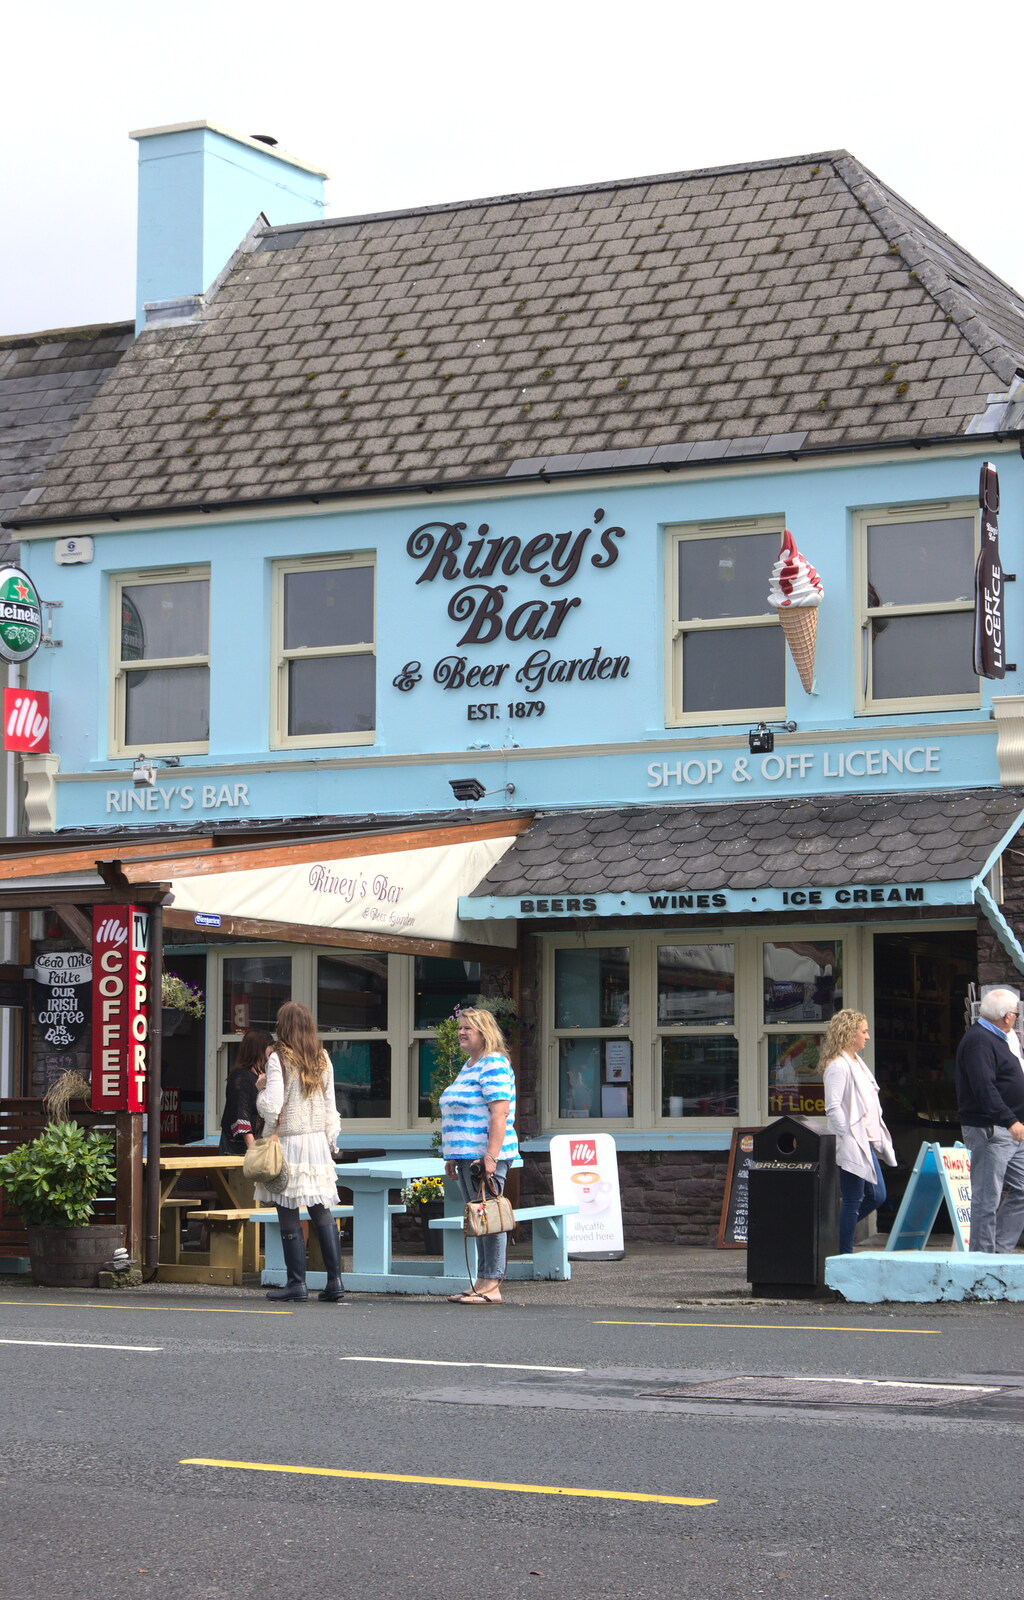 Riney's Bar, with secret speak-easy through the shop from In The Sneem, An tSnaidhm, Kerry, Ireland - 1st August 2017